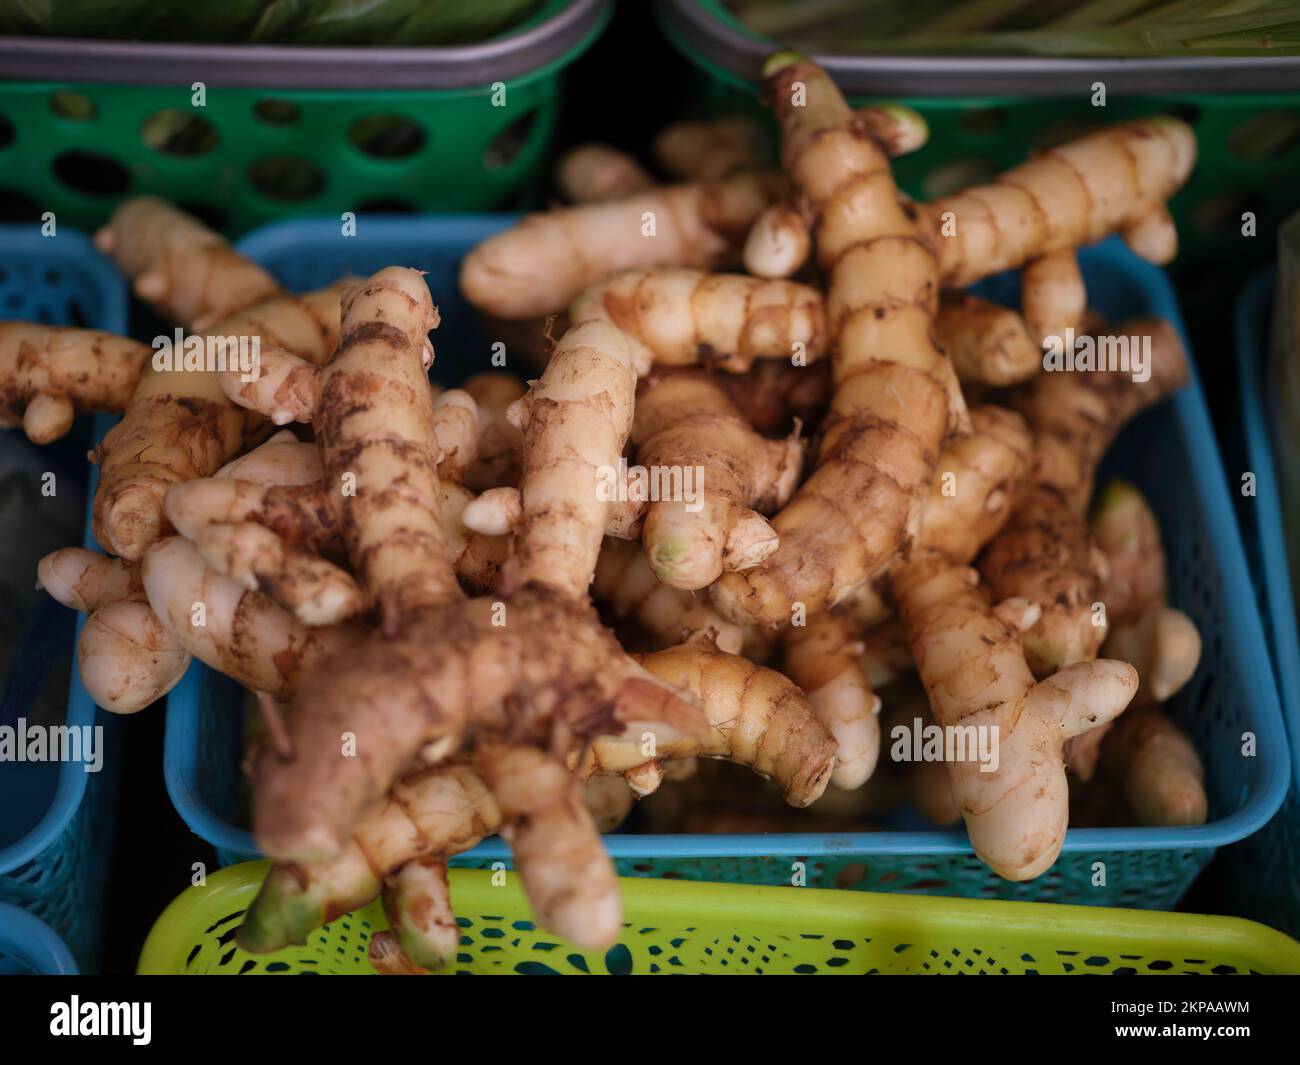 THAI market with various colorful fresh vegetables Stock Photo